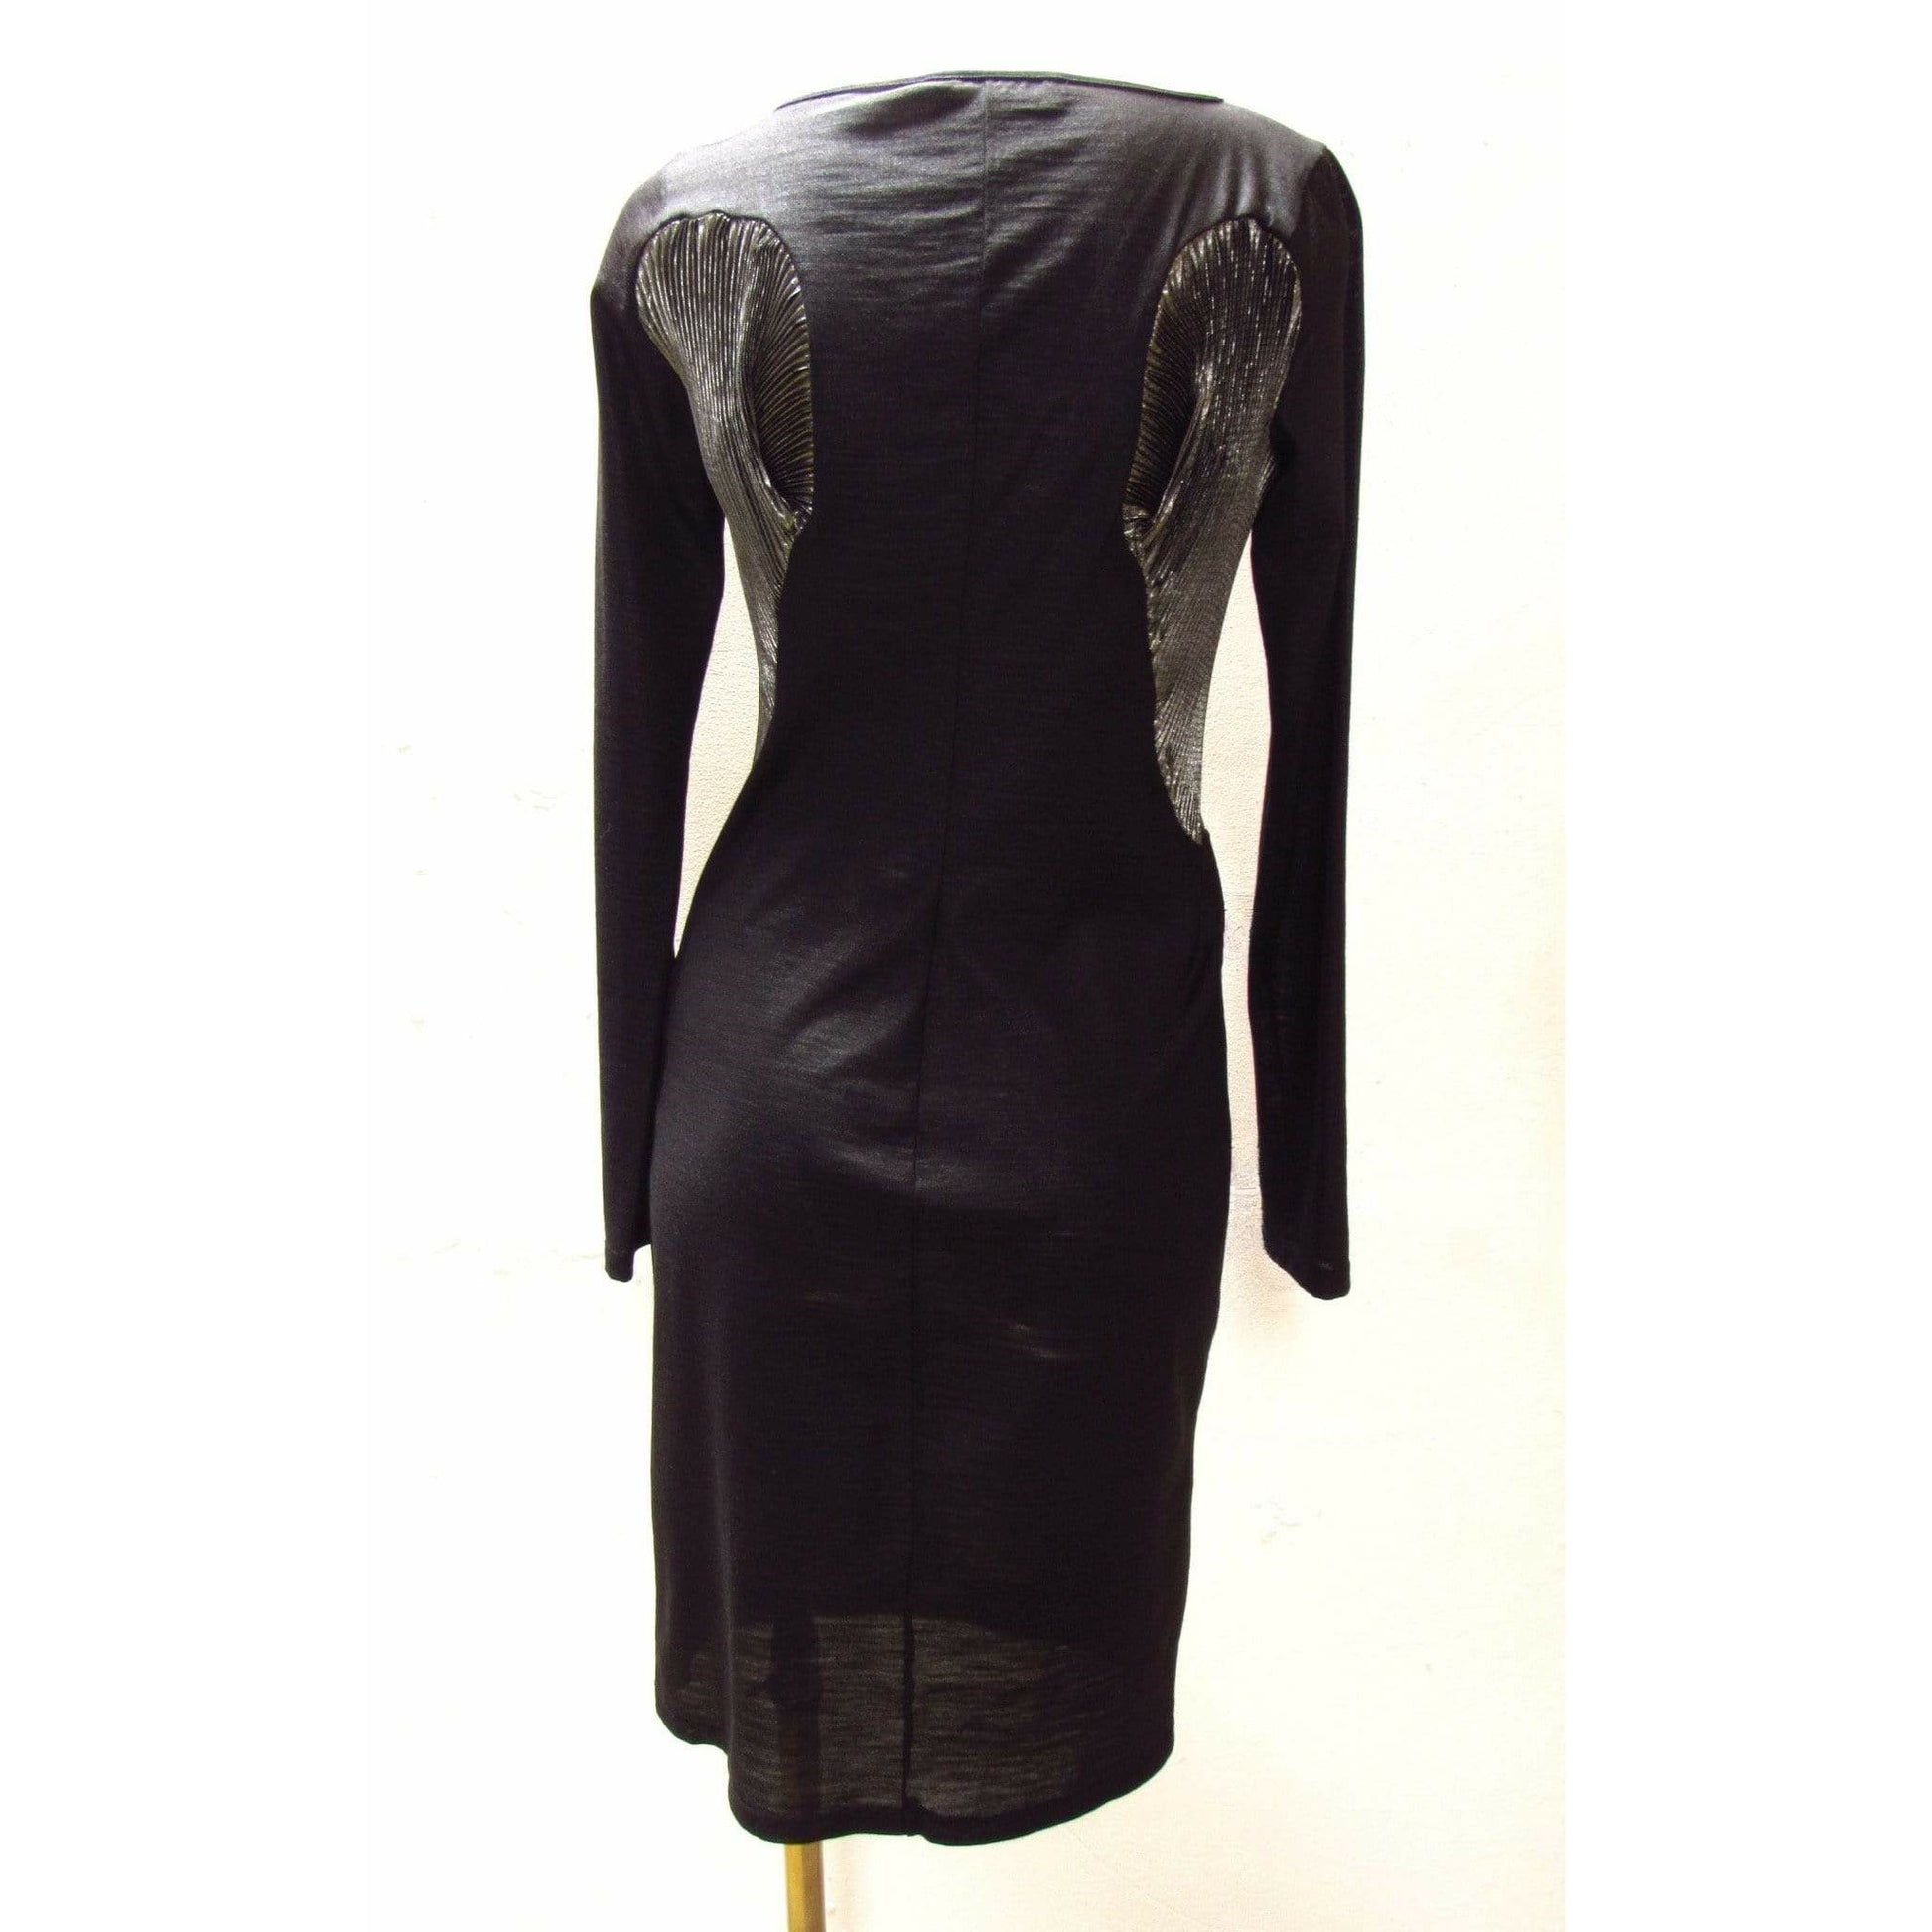 Dresses hussein-chalayan-black-and-silver-dress Black